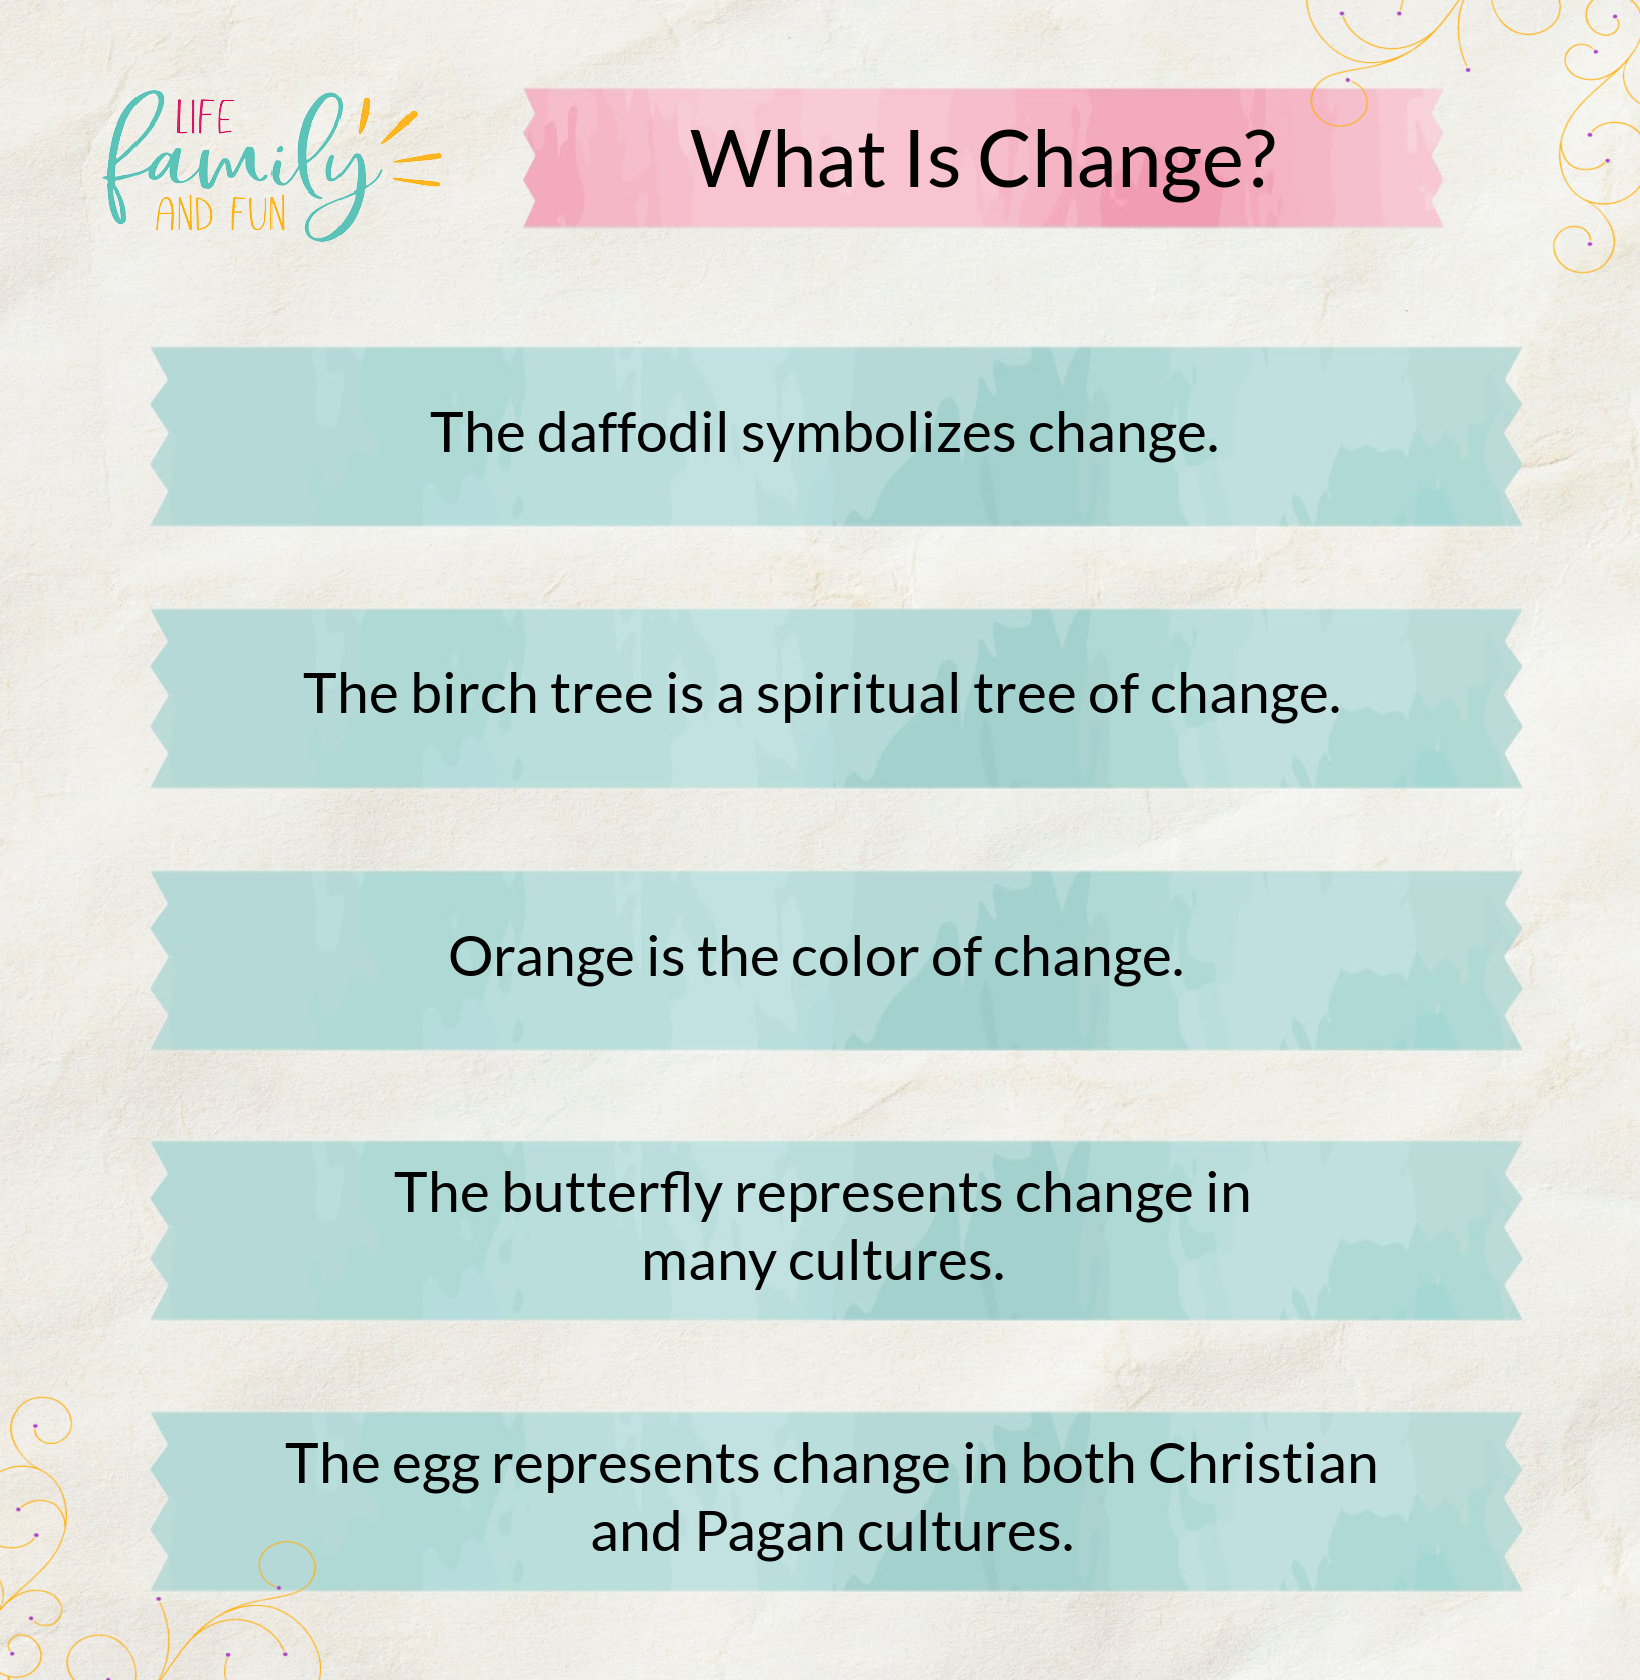 What Is Change?